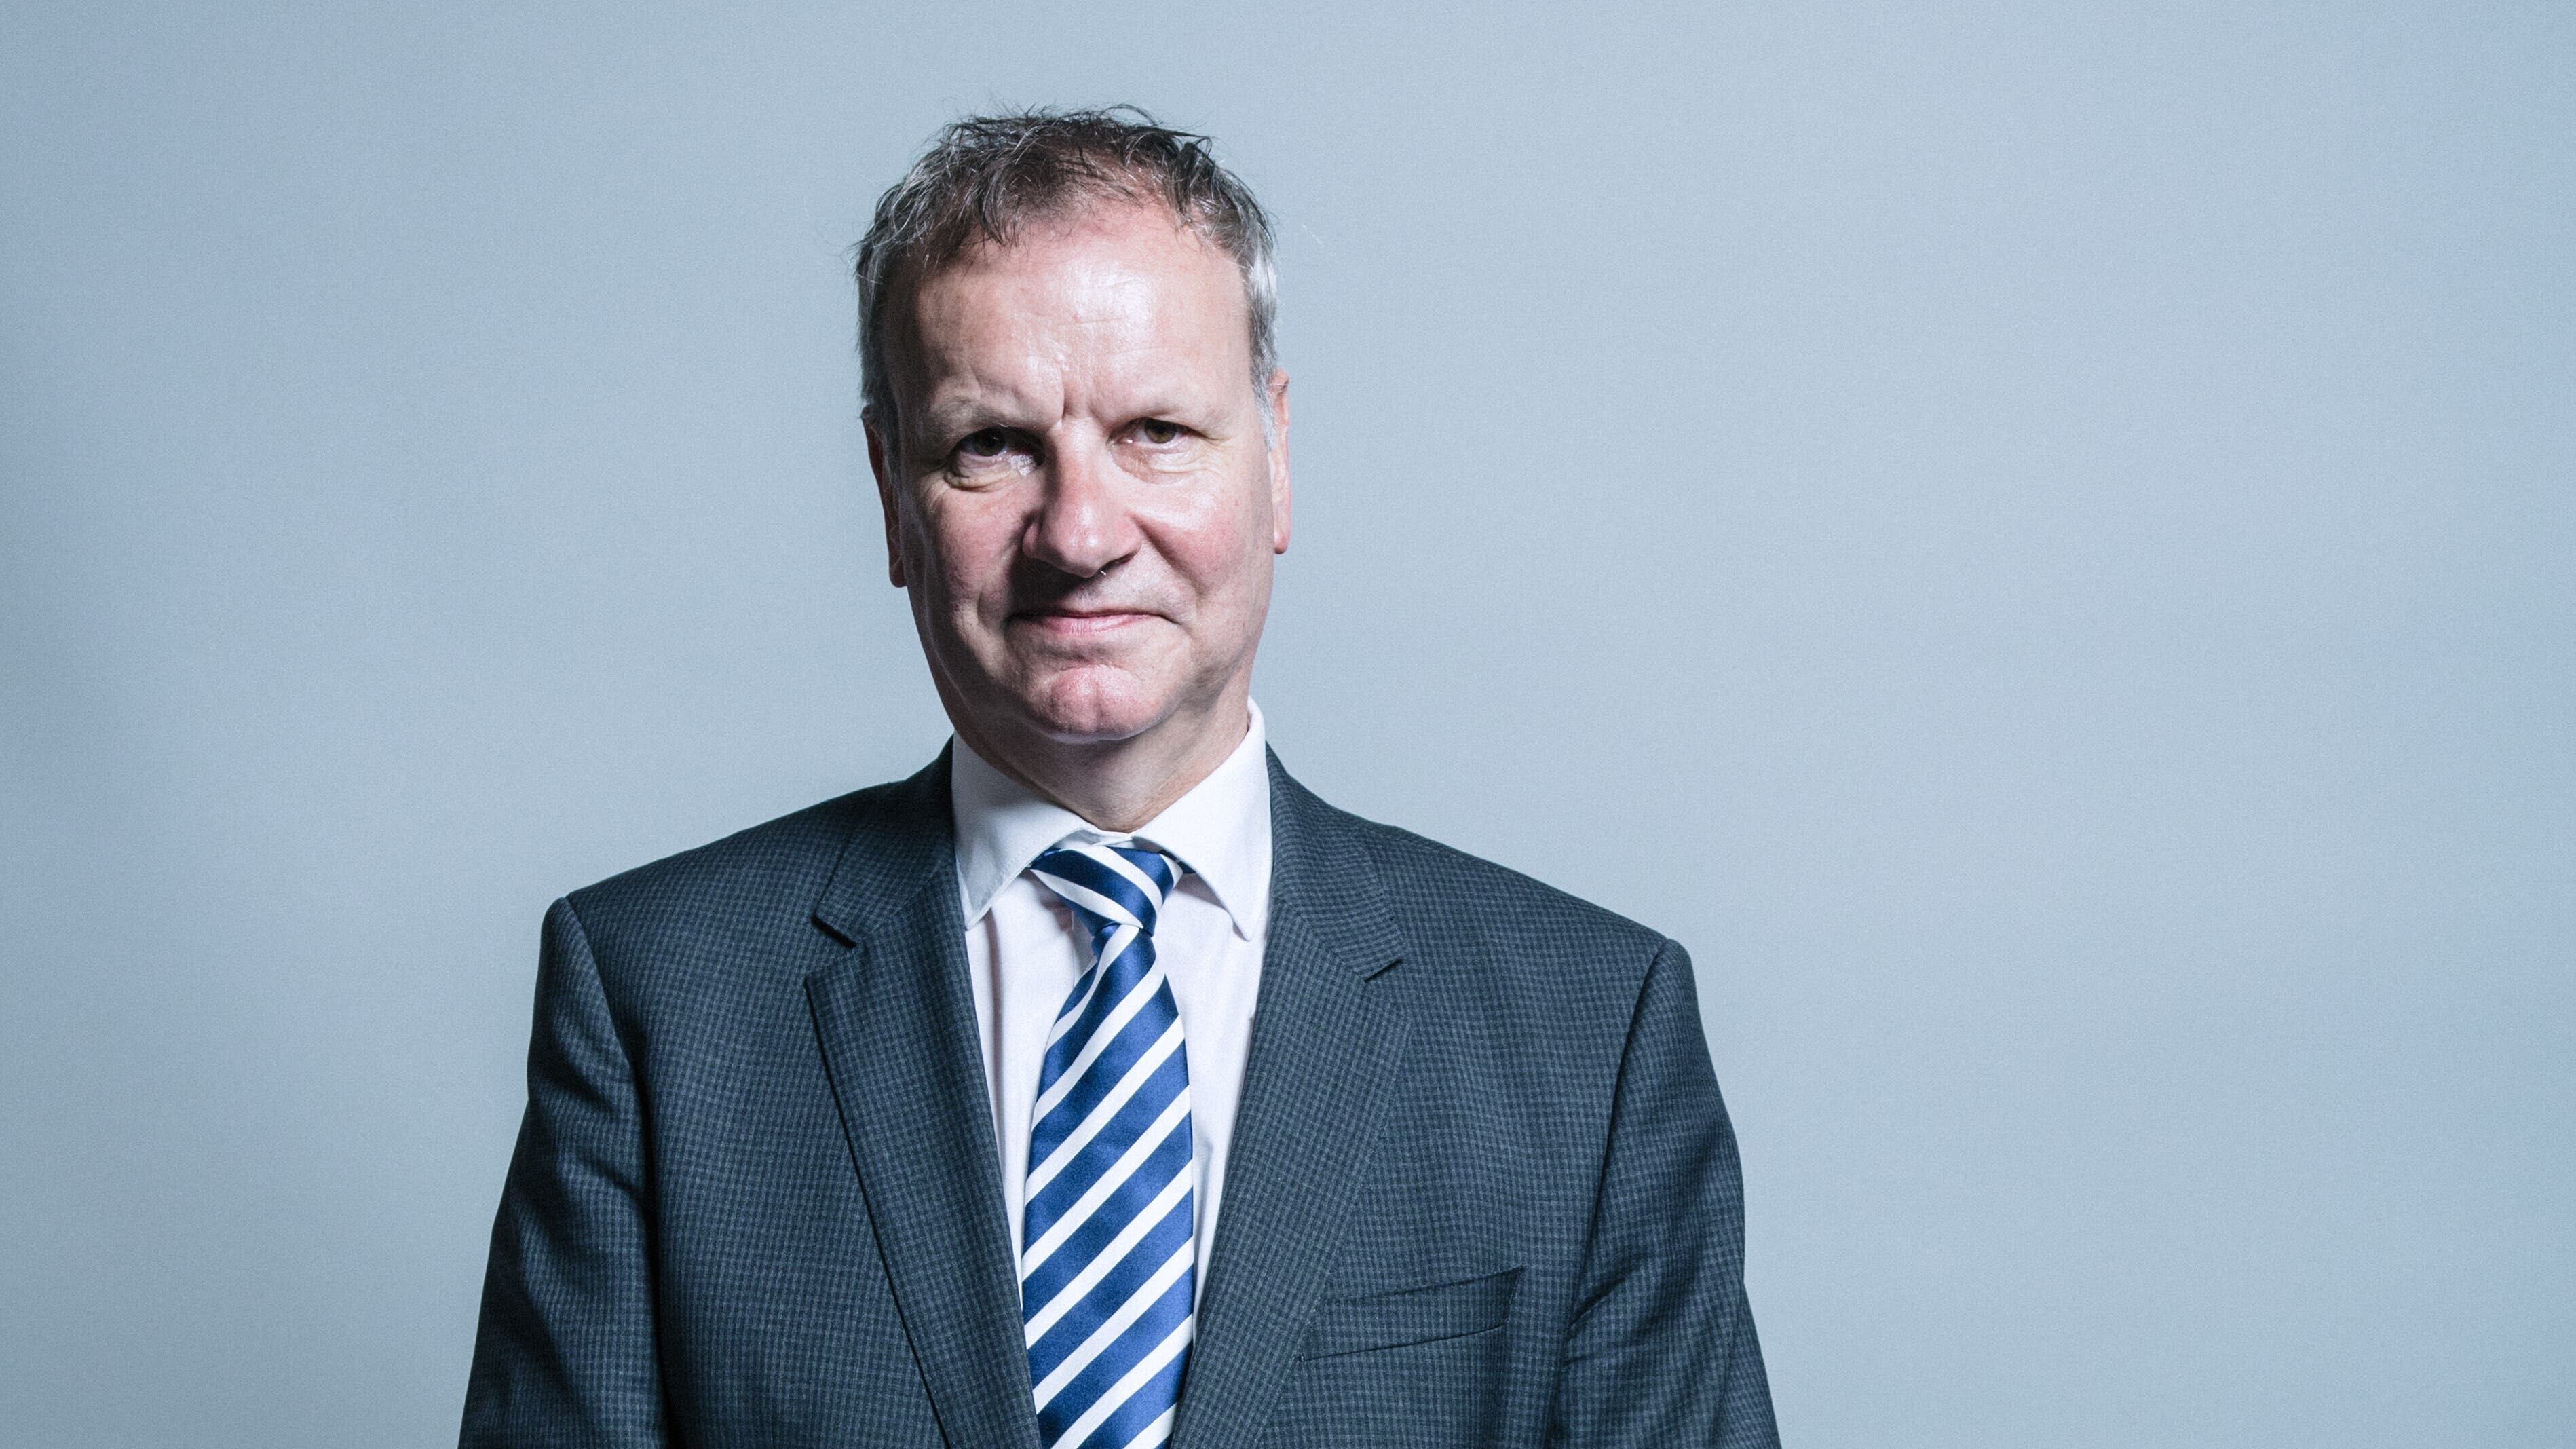 Pete Wishart said he is looking forward to standing for election again (Chris McAndrew/PA)